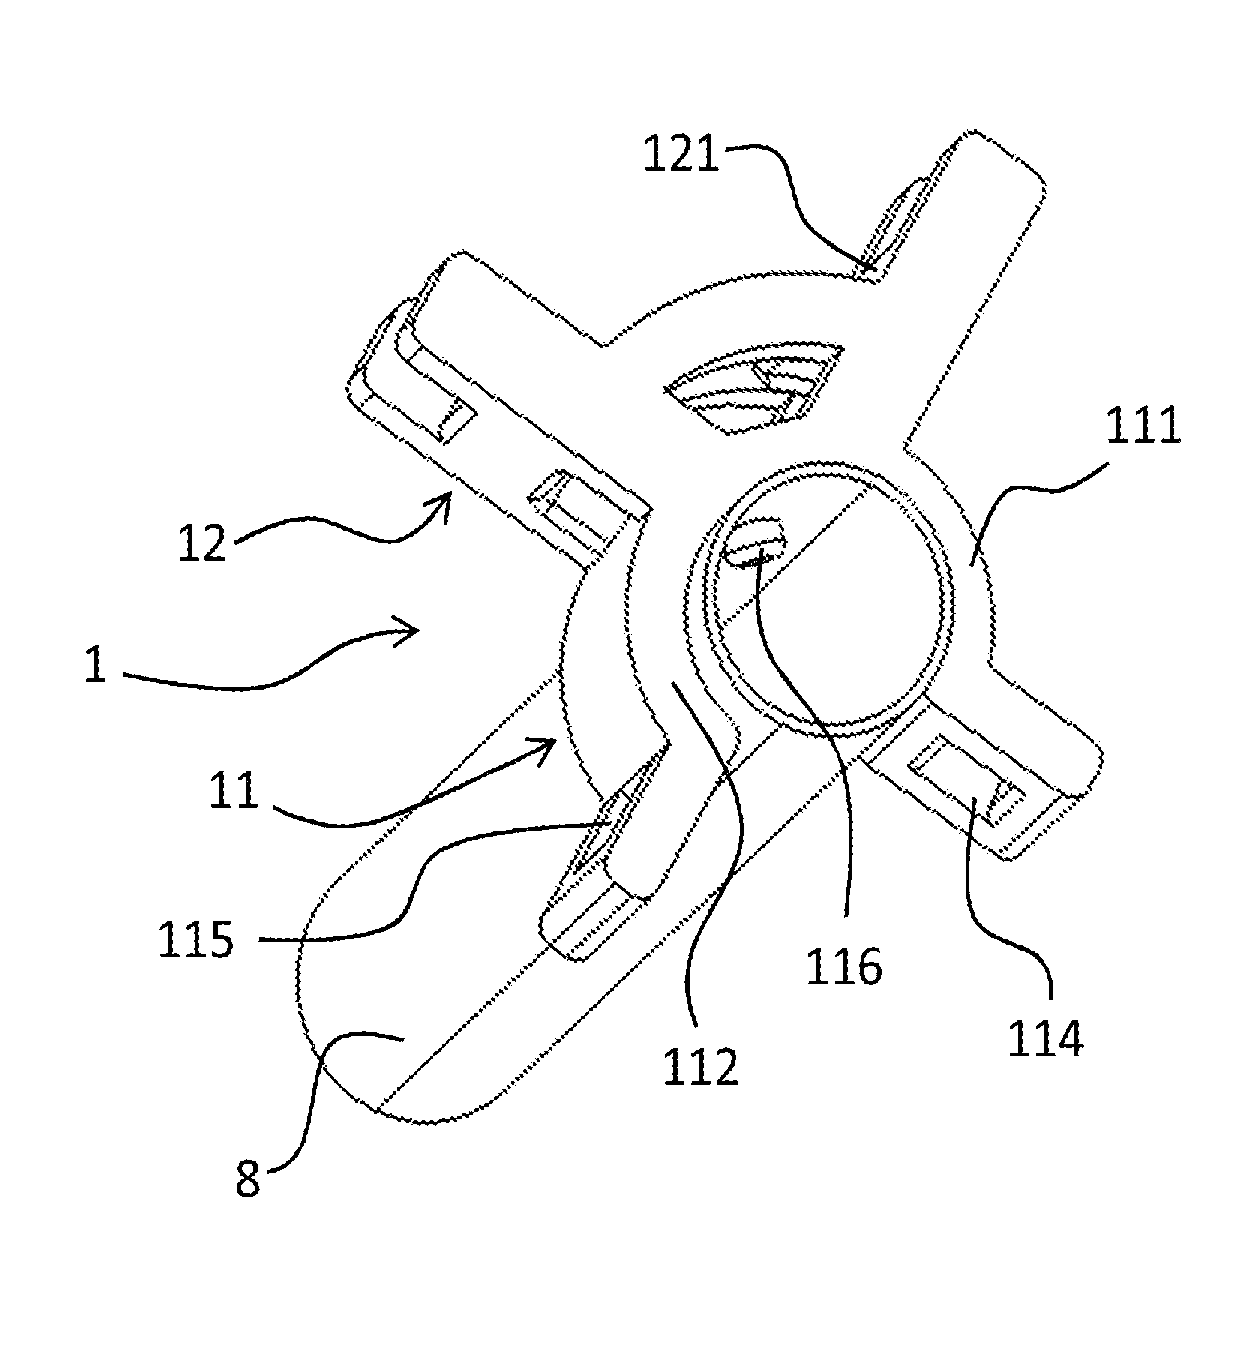 Support element for supporting at least one conduit in an aircraft, and corresponding support device